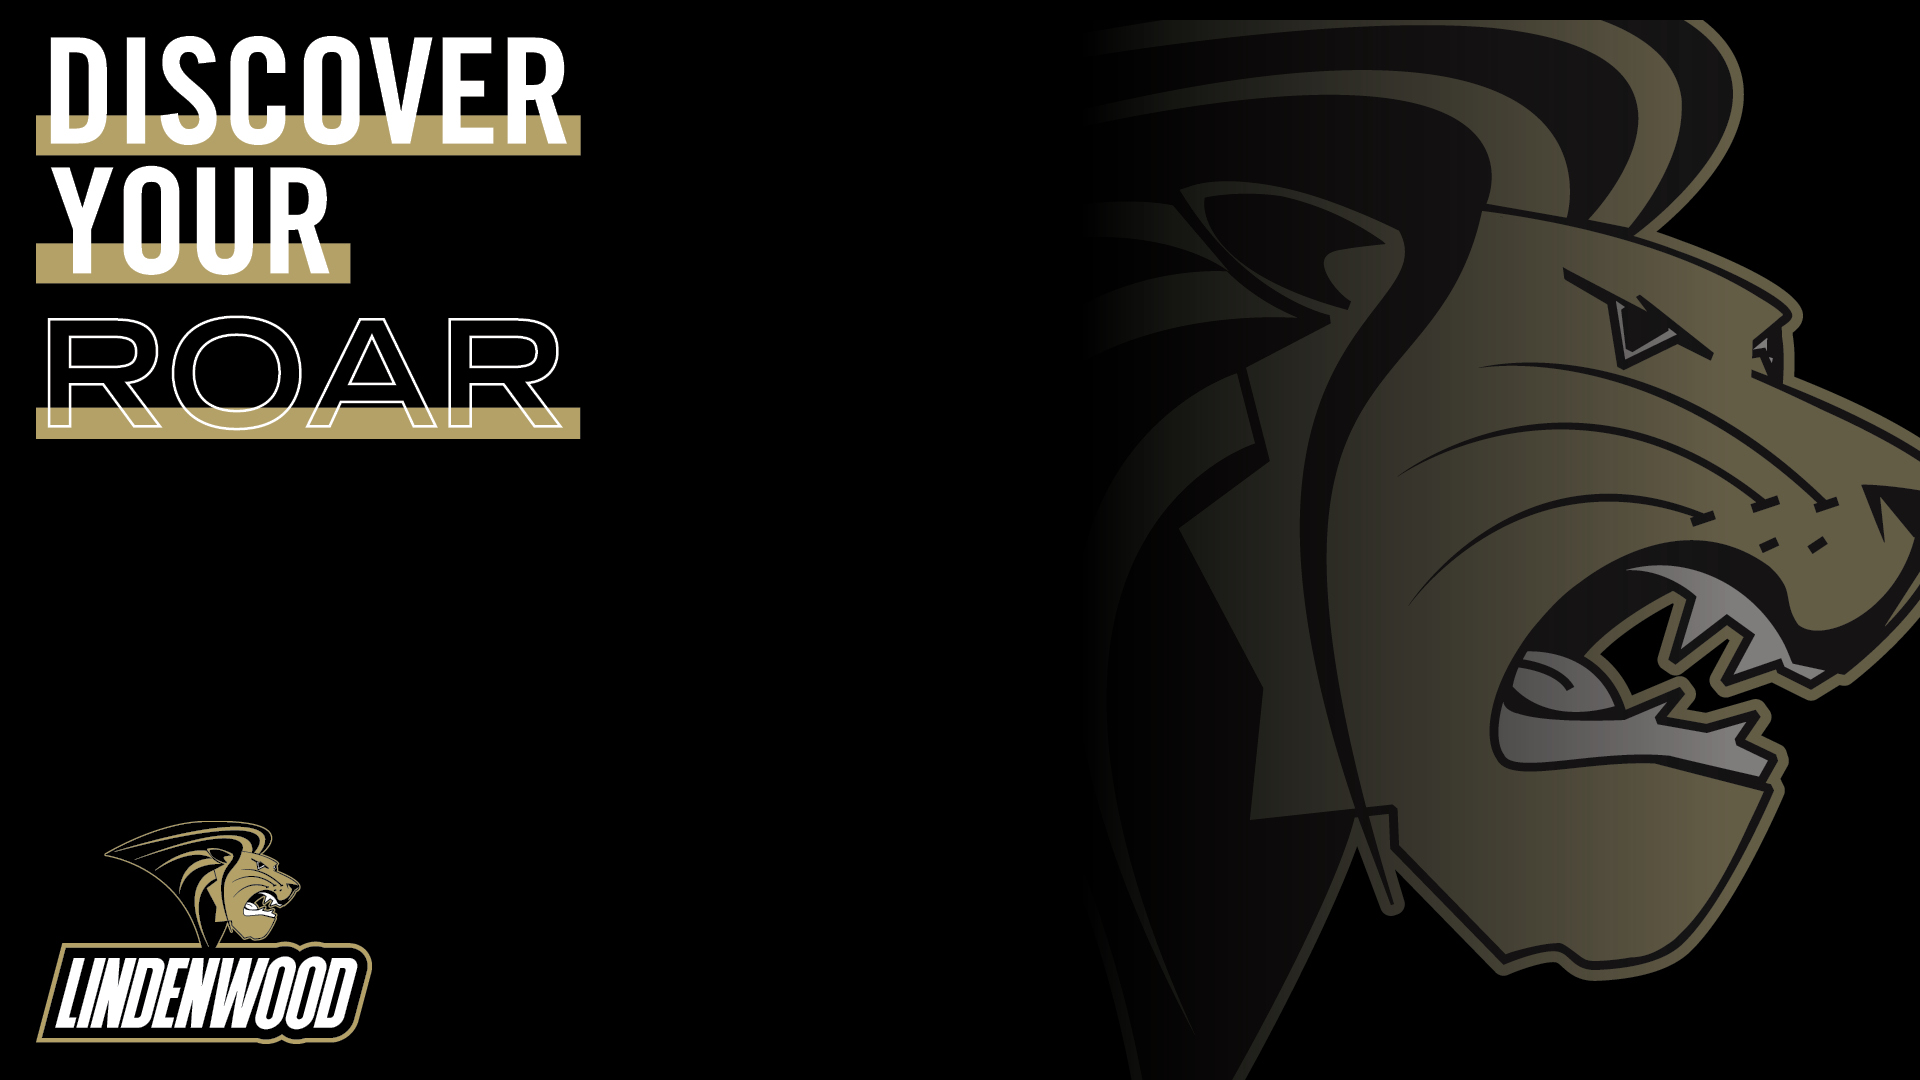 The athletics logo, a stylized lion head, with a black gradient fading the image. The Phrase discover your roar in the top left corner